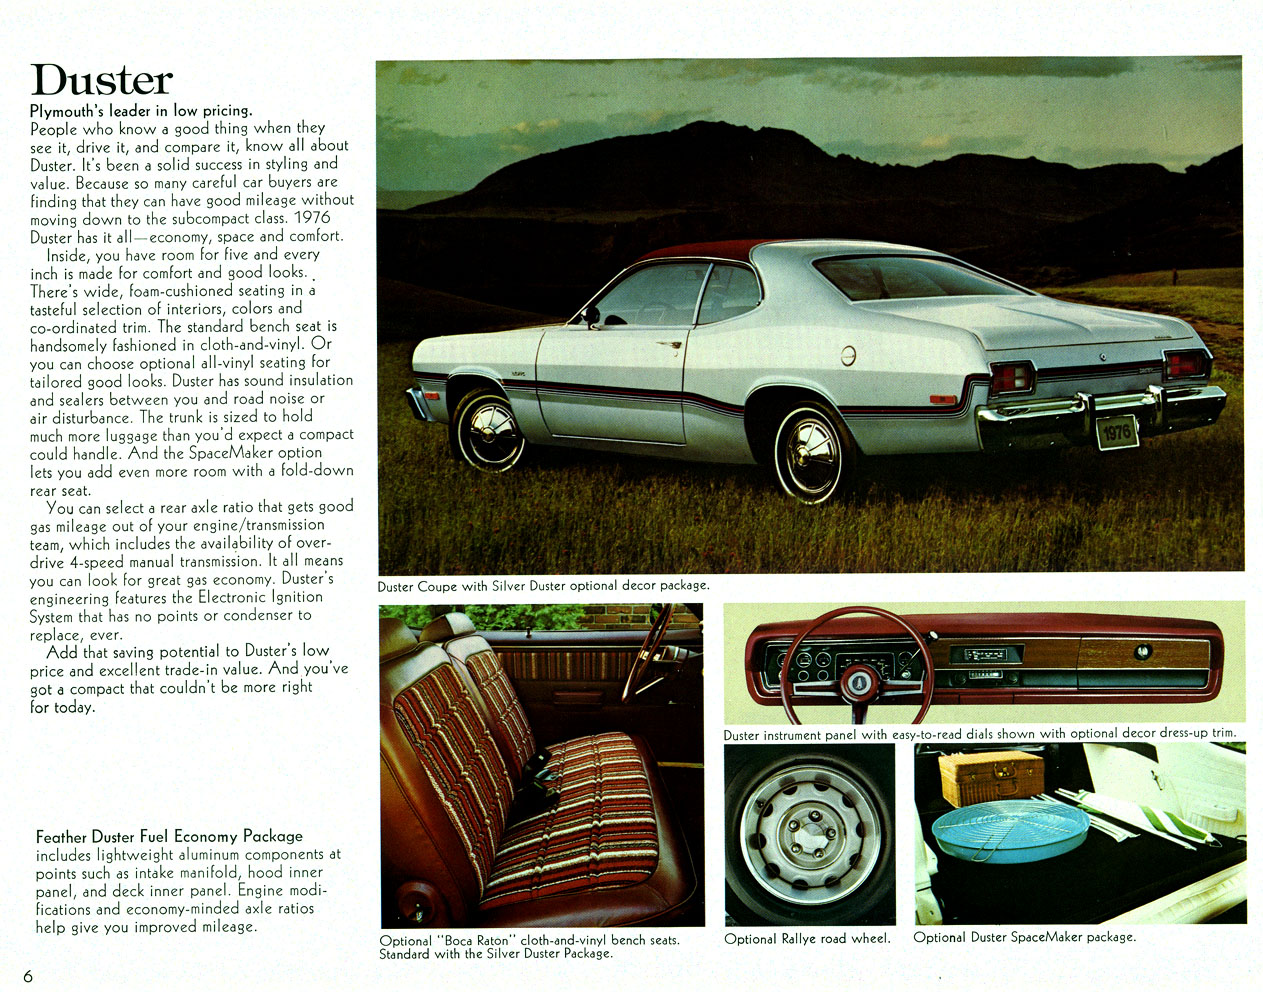 1976 Chrysler Plymouth Brochure Page 6